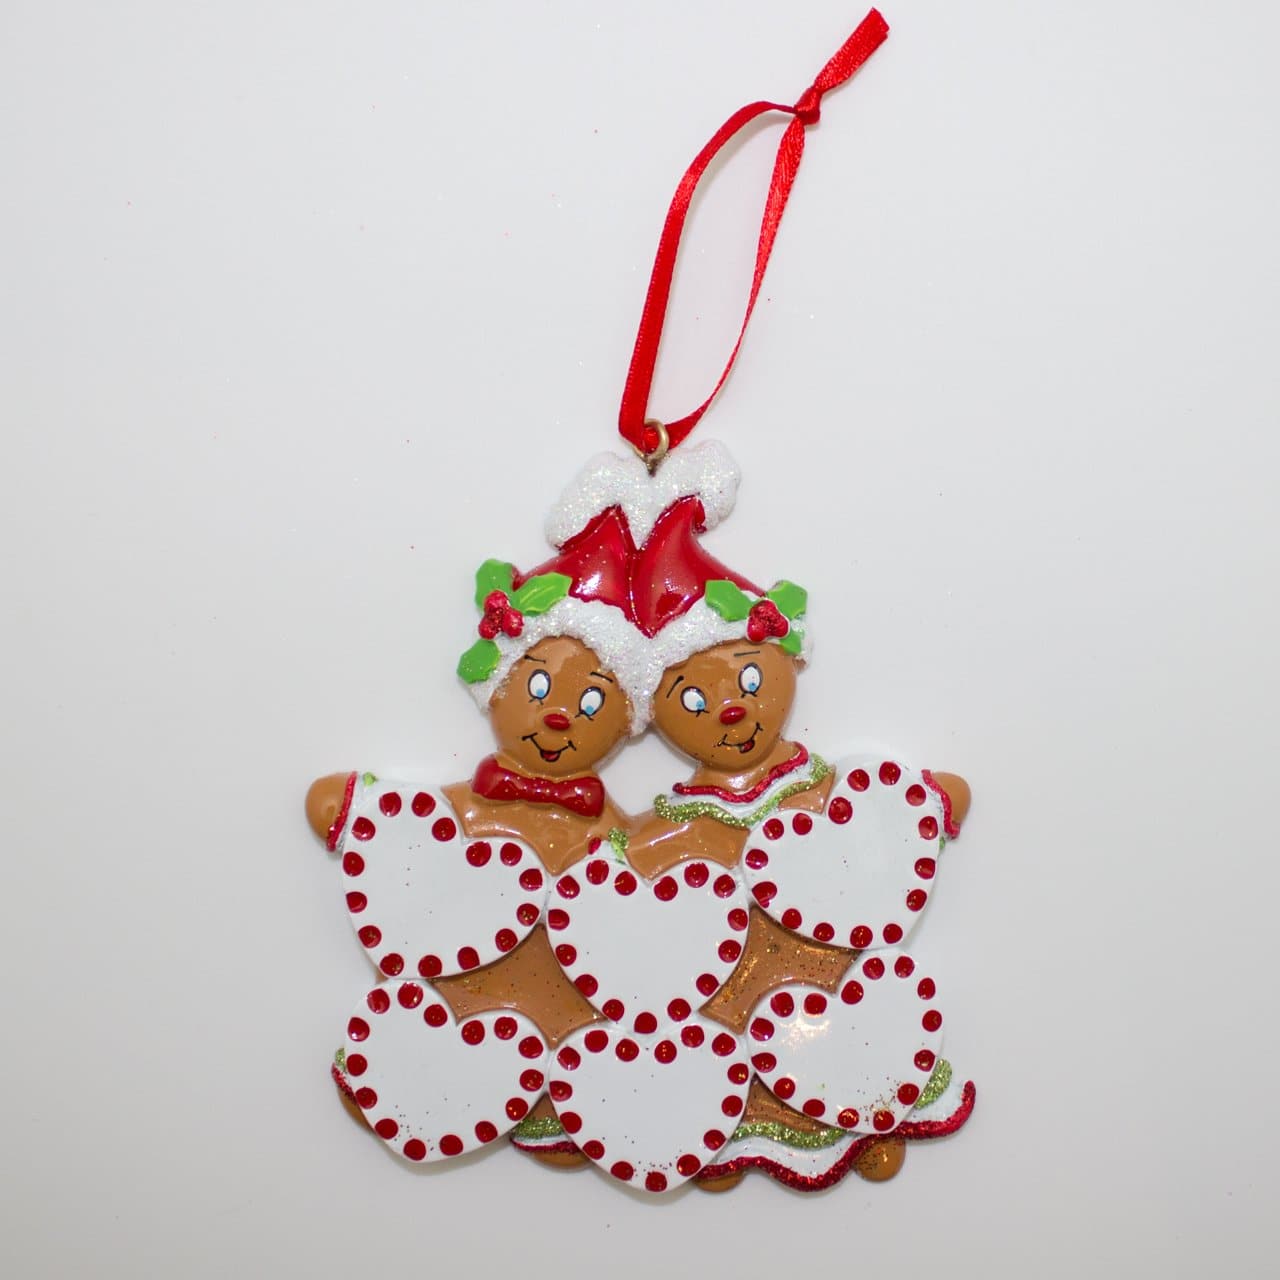 Gingerbread Man Hearts - Christmas Ornament (Suitable for Personalization)